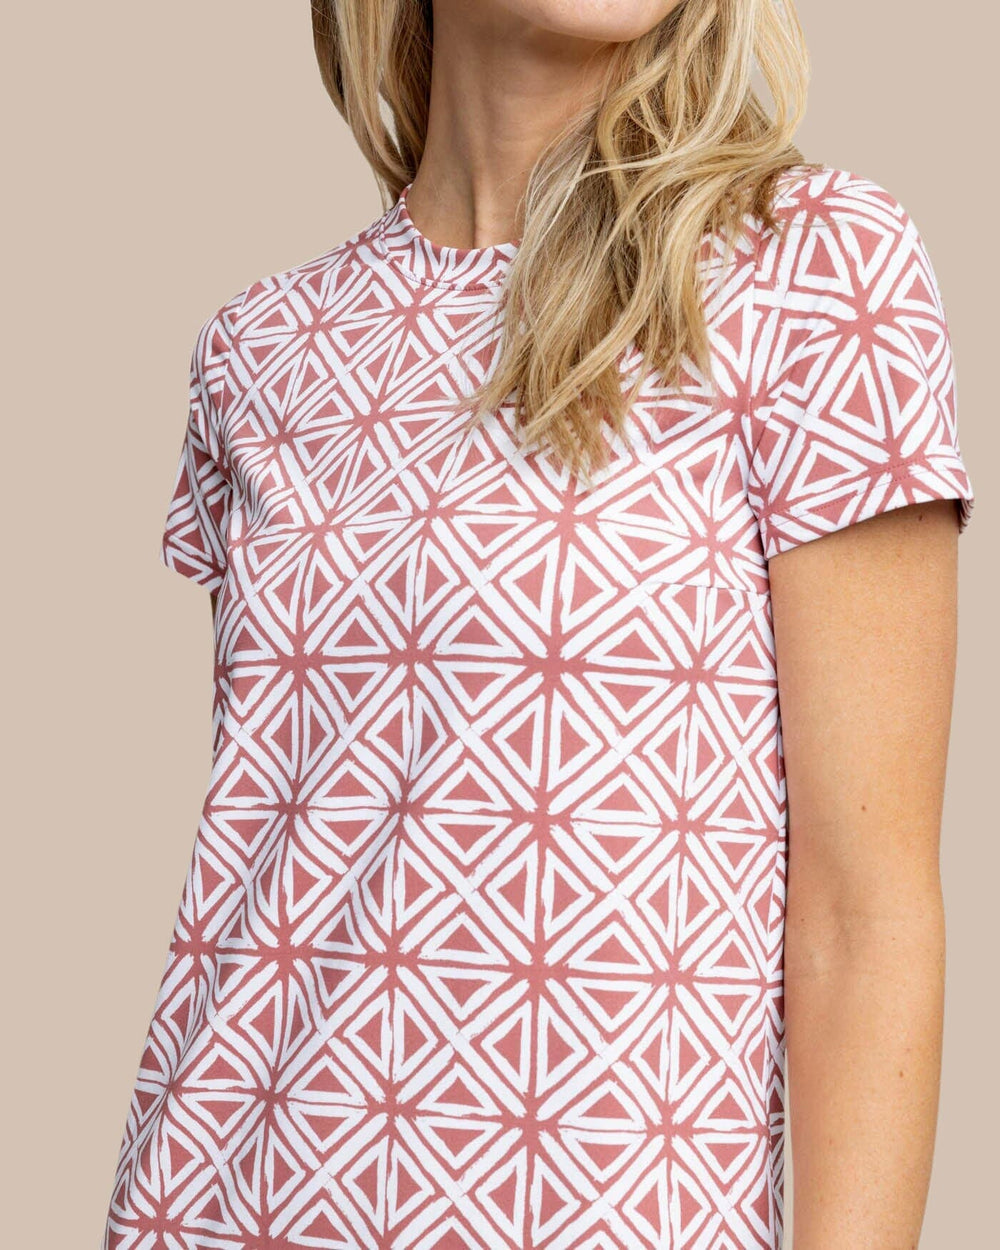 The detail view of the Southern Tide Chanelle Painted Geo Performance Dress by Southern Tide - Dusty Coral